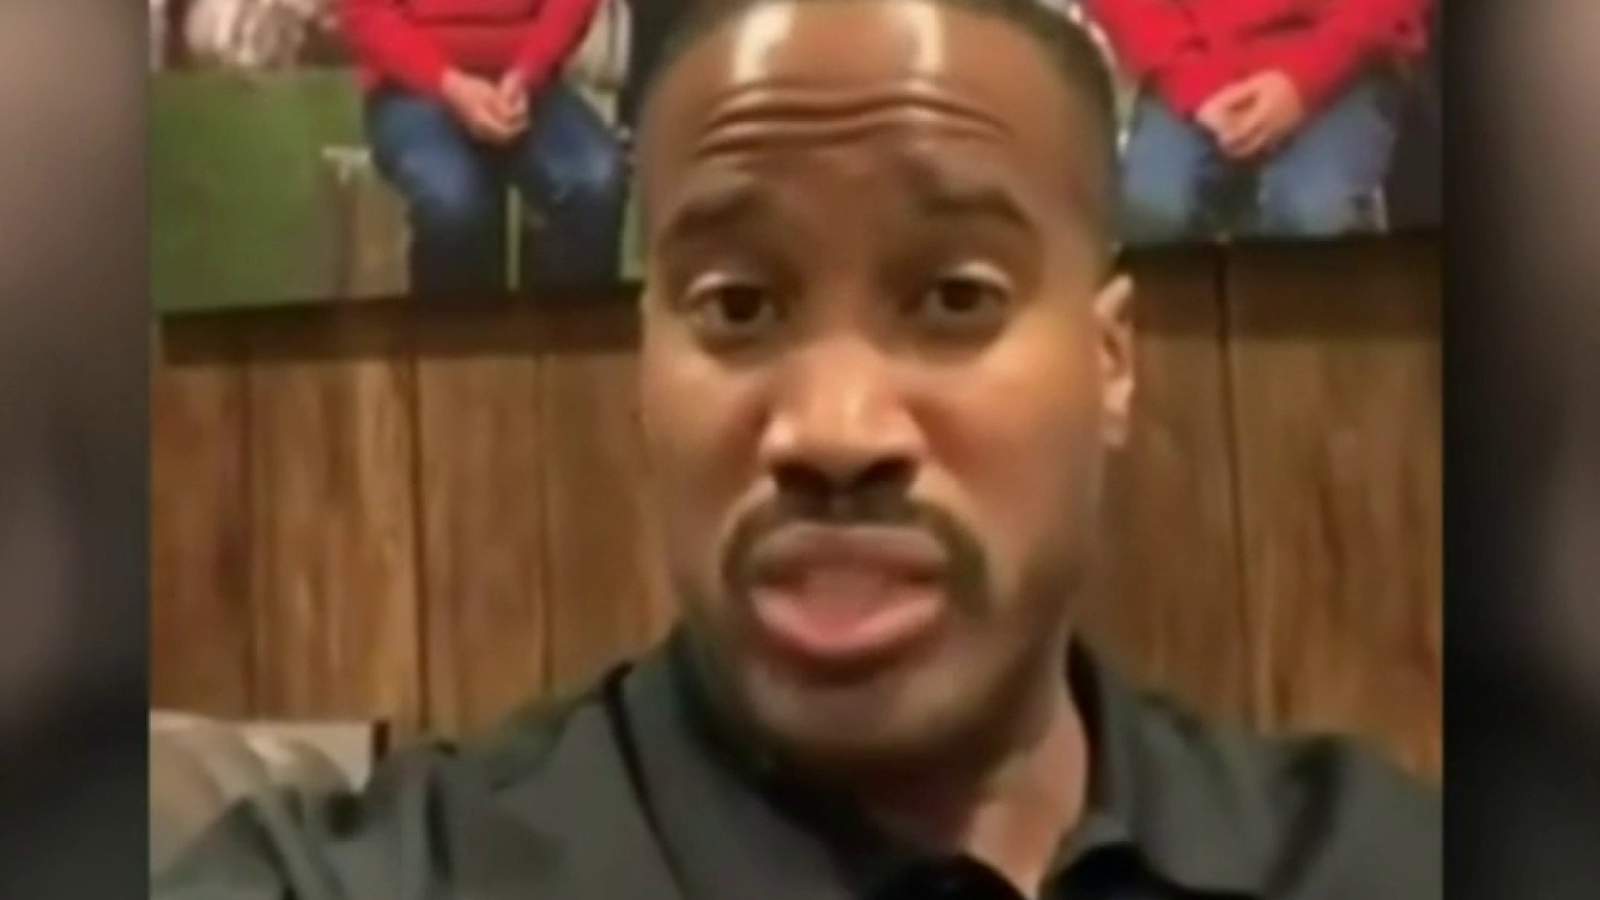 John James concedes to Gary Peters in Michigan Senate race, offers congratulations in video